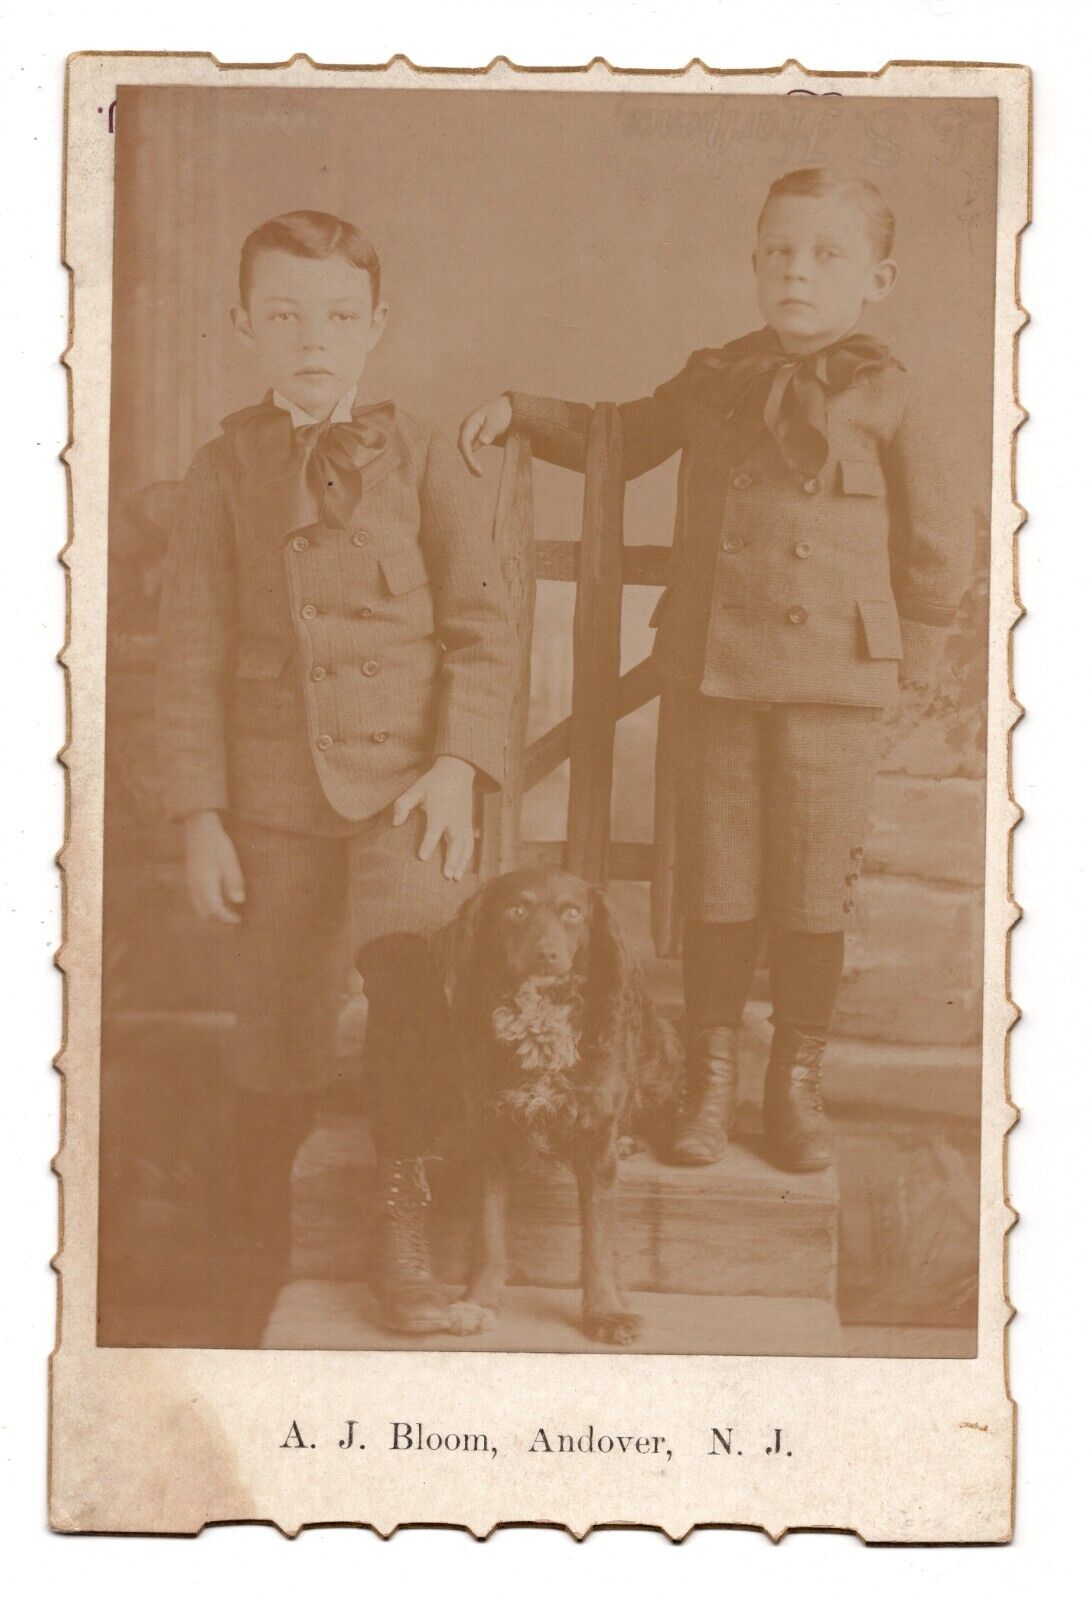 C. 1890s CABINET CARD A.J. BLOOM TWO YOUNG CHILDREN WITH DOG ANDOVER NEW JERSEY